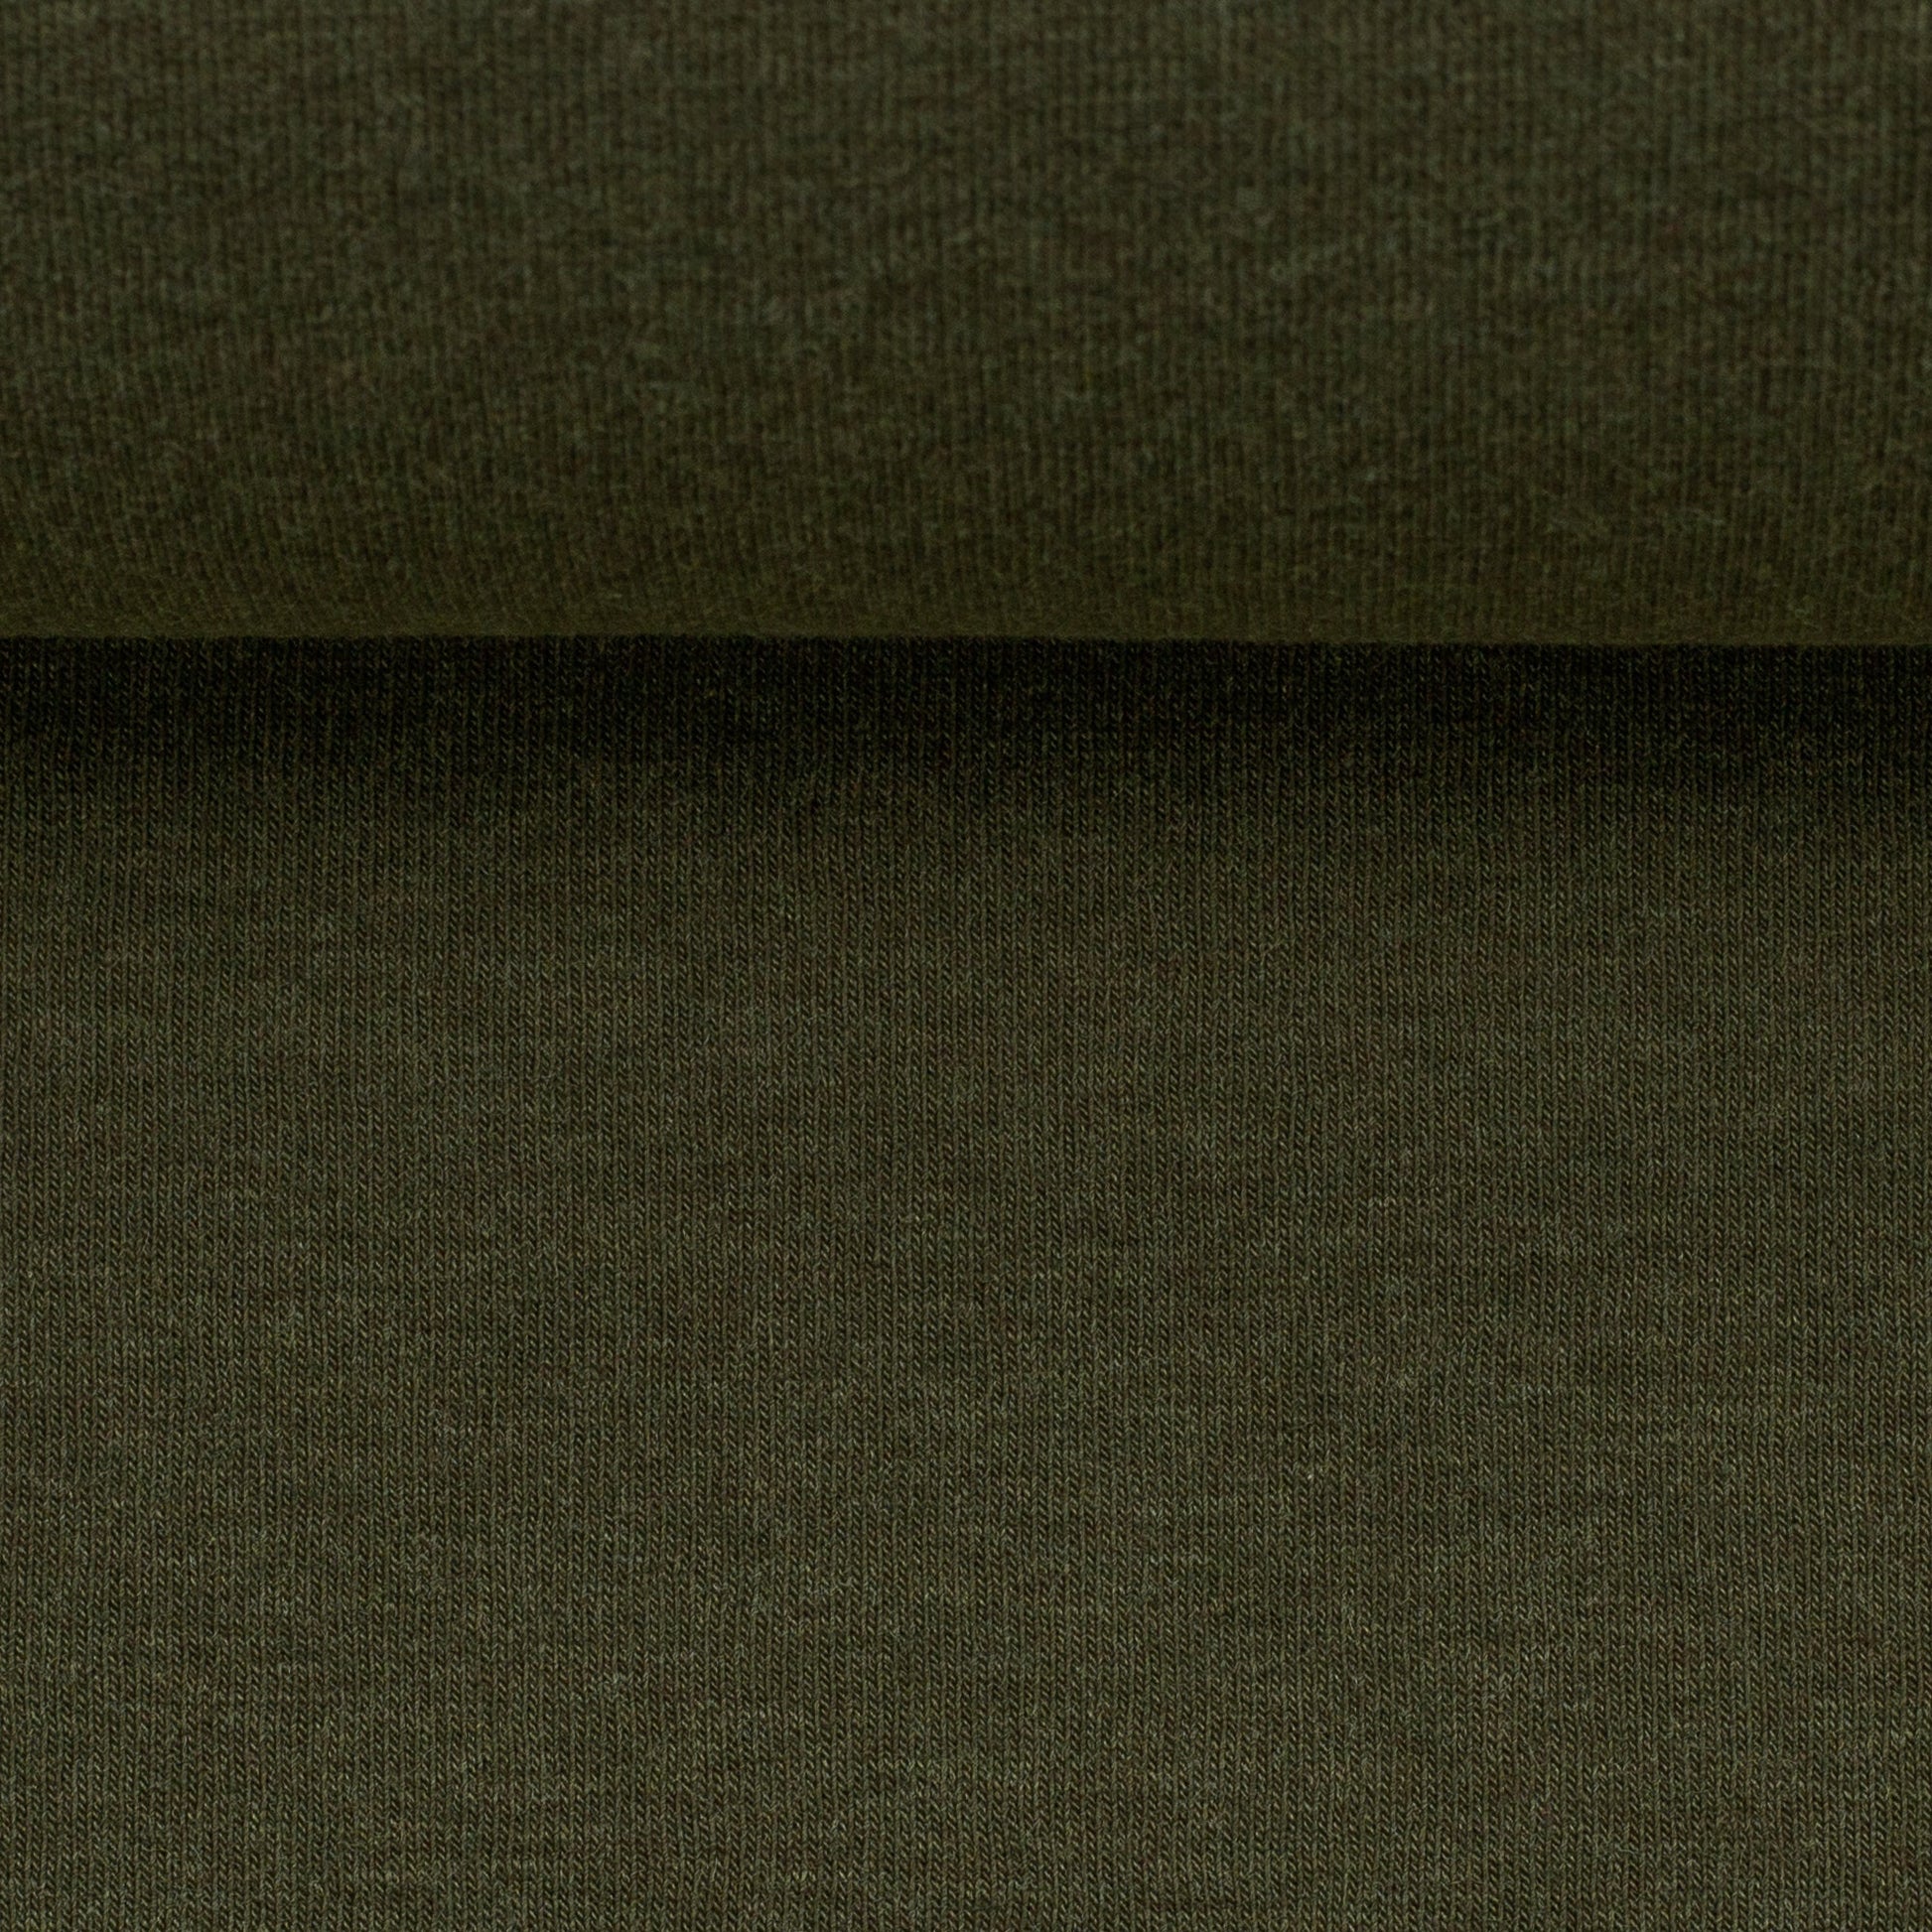 Swafing Melange - Khaki Green - Euro-ribbing - Jersey - French Terry - Fleeced French Terry - 1769 - Little Rhody Sewing Co.